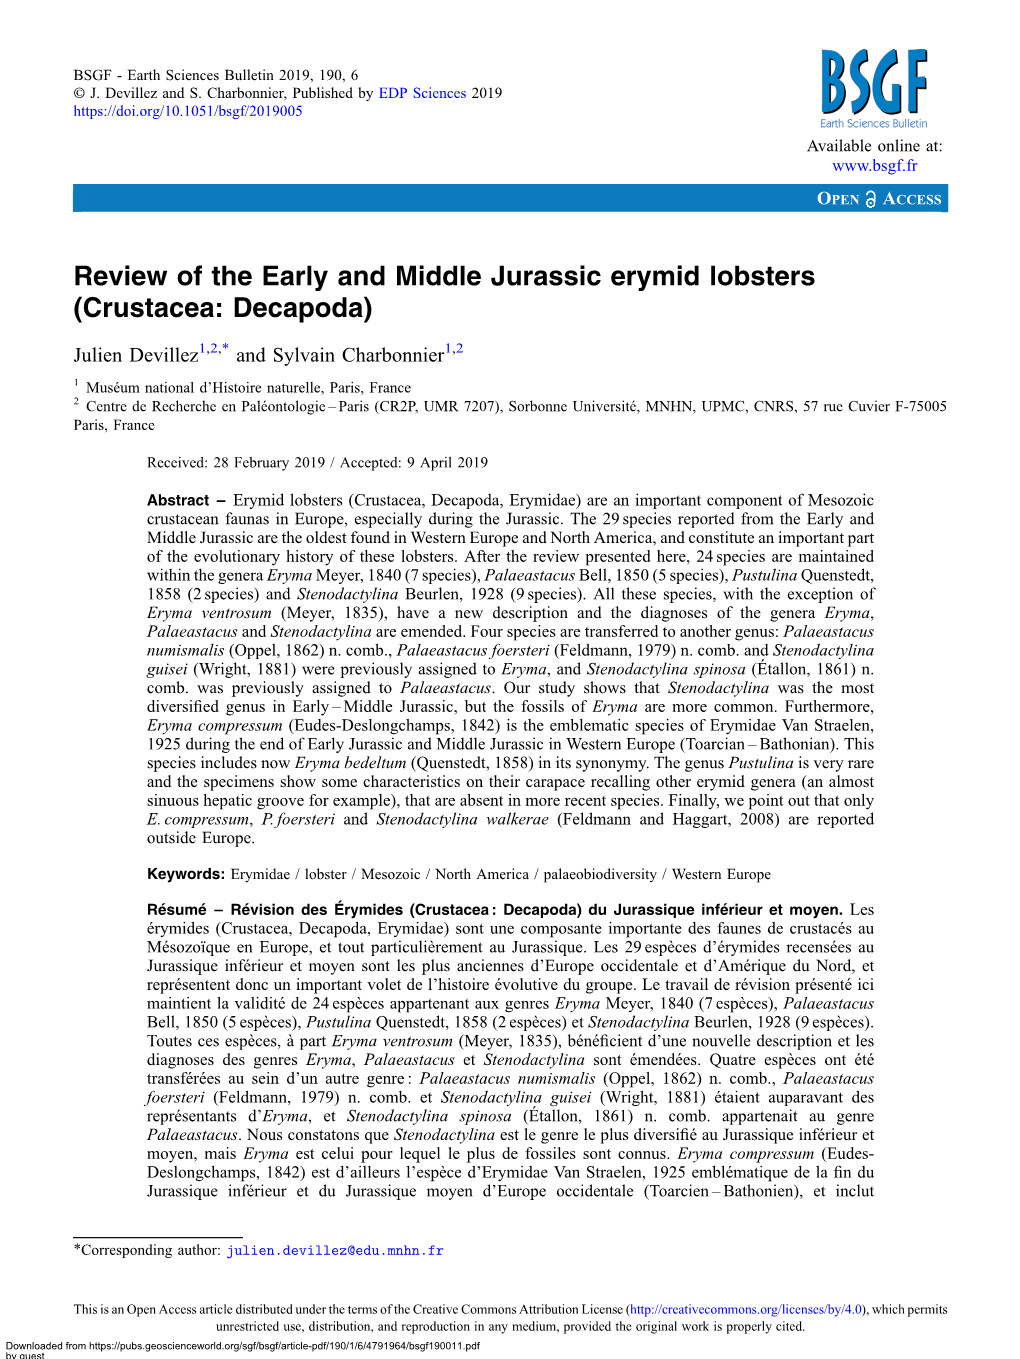 Review of the Early and Middle Jurassic Erymid Lobsters (Crustacea: Decapoda)